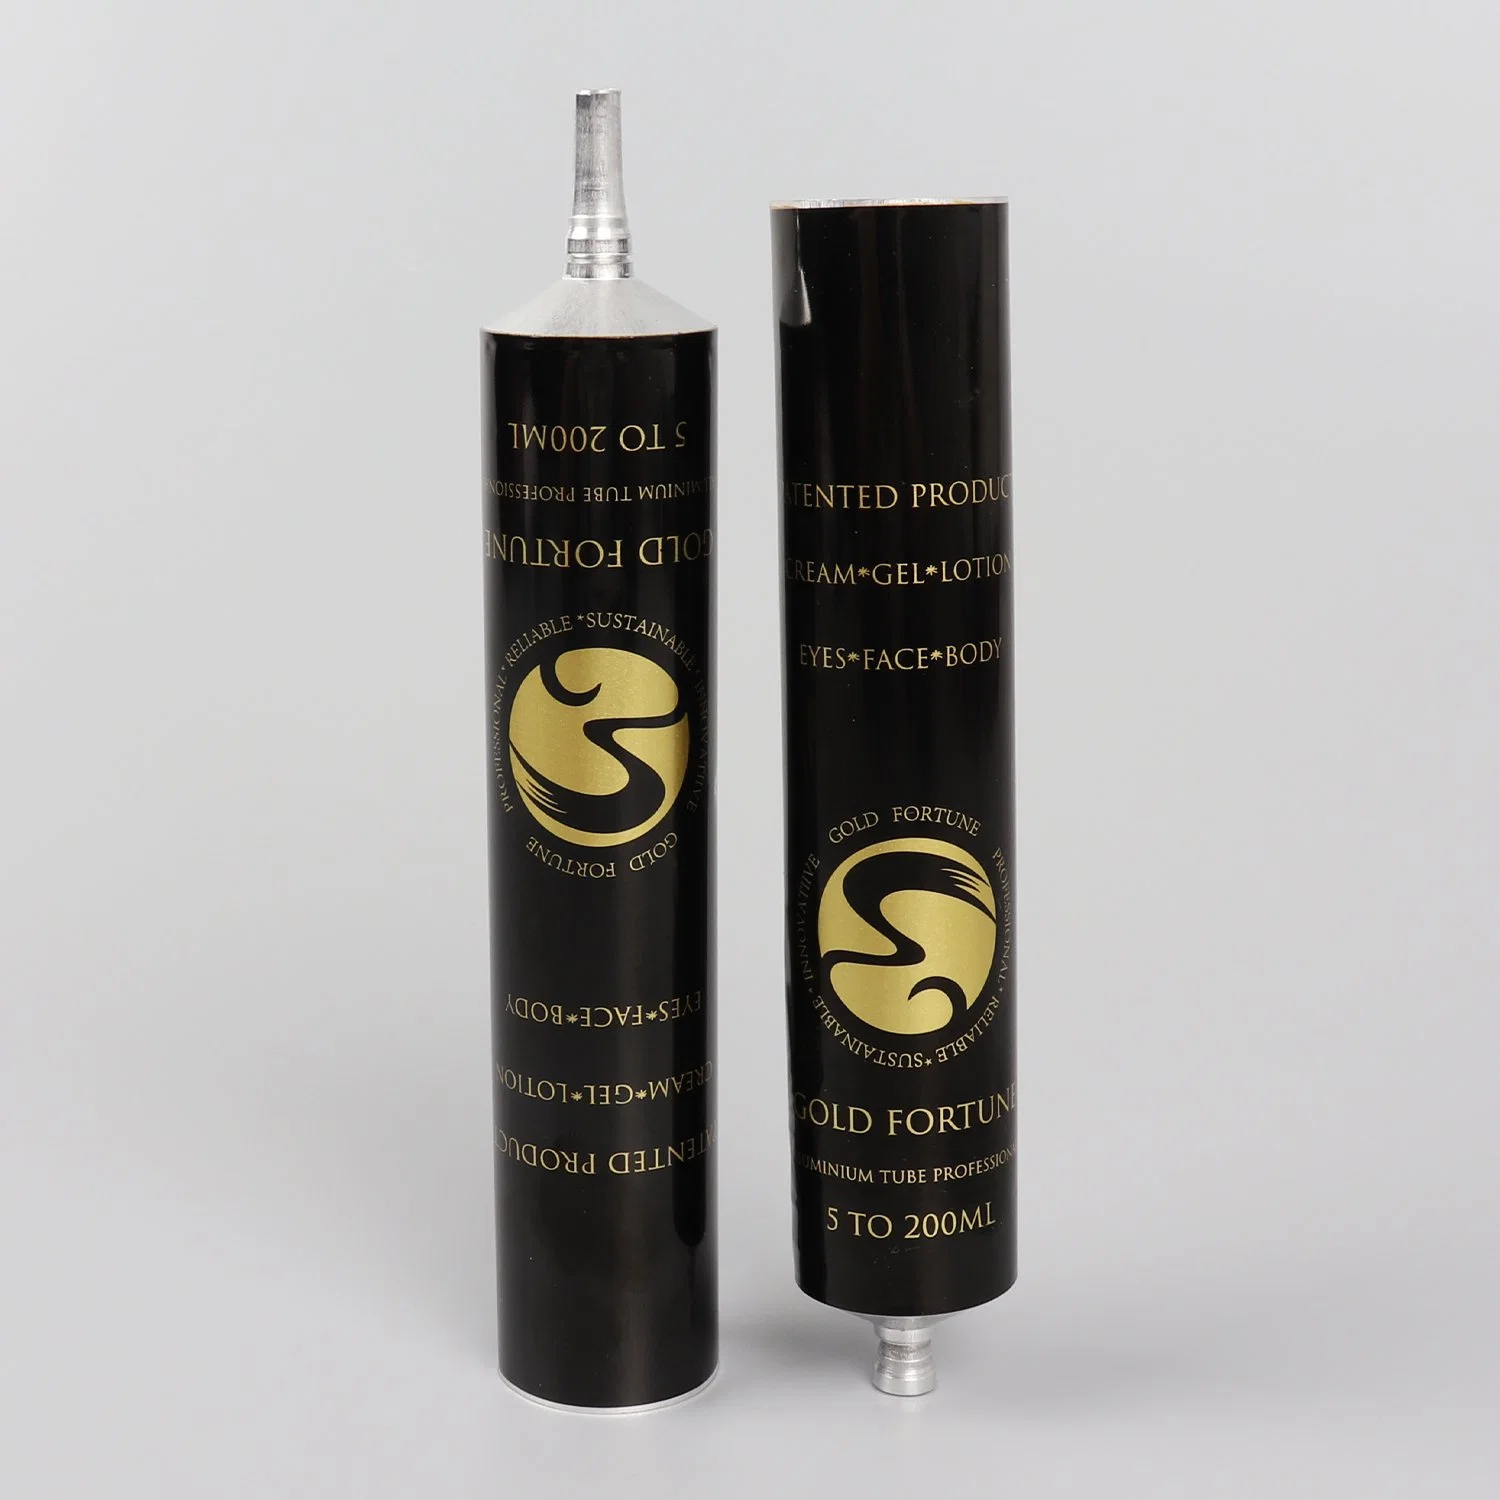 Innovative Tamper-Evident Aluminum Tube Is 100% Eco-Friendly and Recyclable